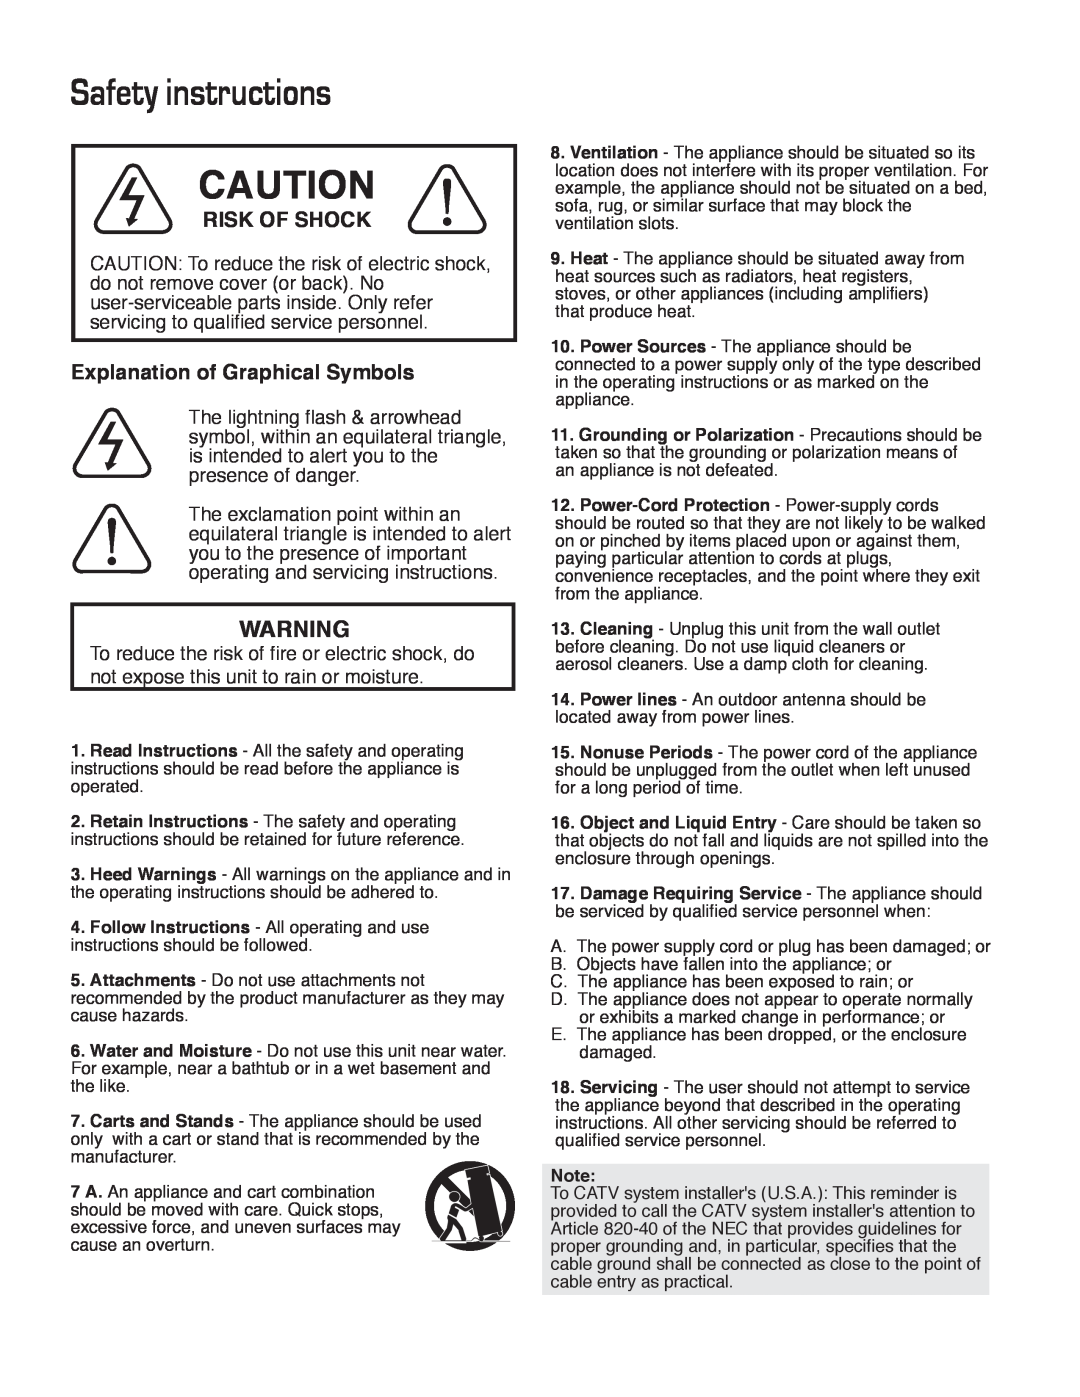 VocoPro IR-9000 owner manual Safety instructions, Risk Of Shock, Explanation of Graphical Symbols 